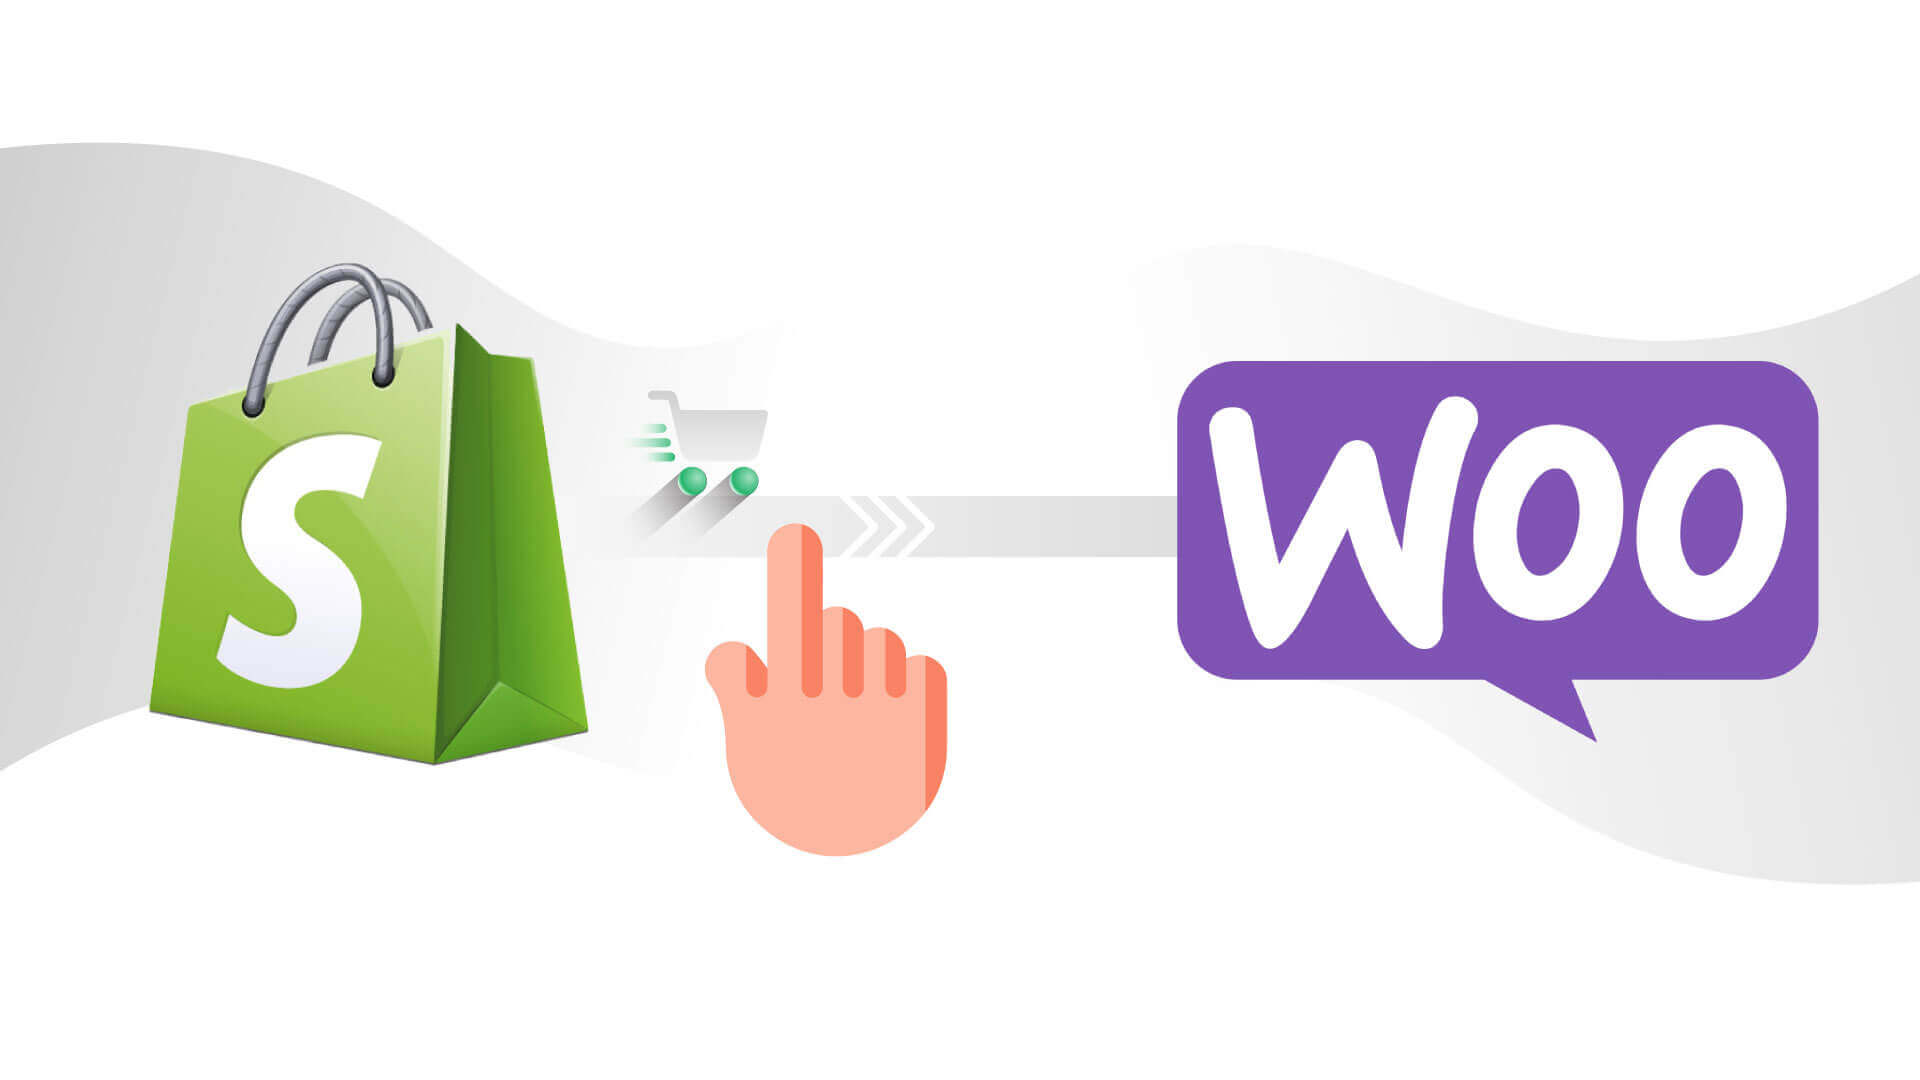 Shopify to WooCommerce